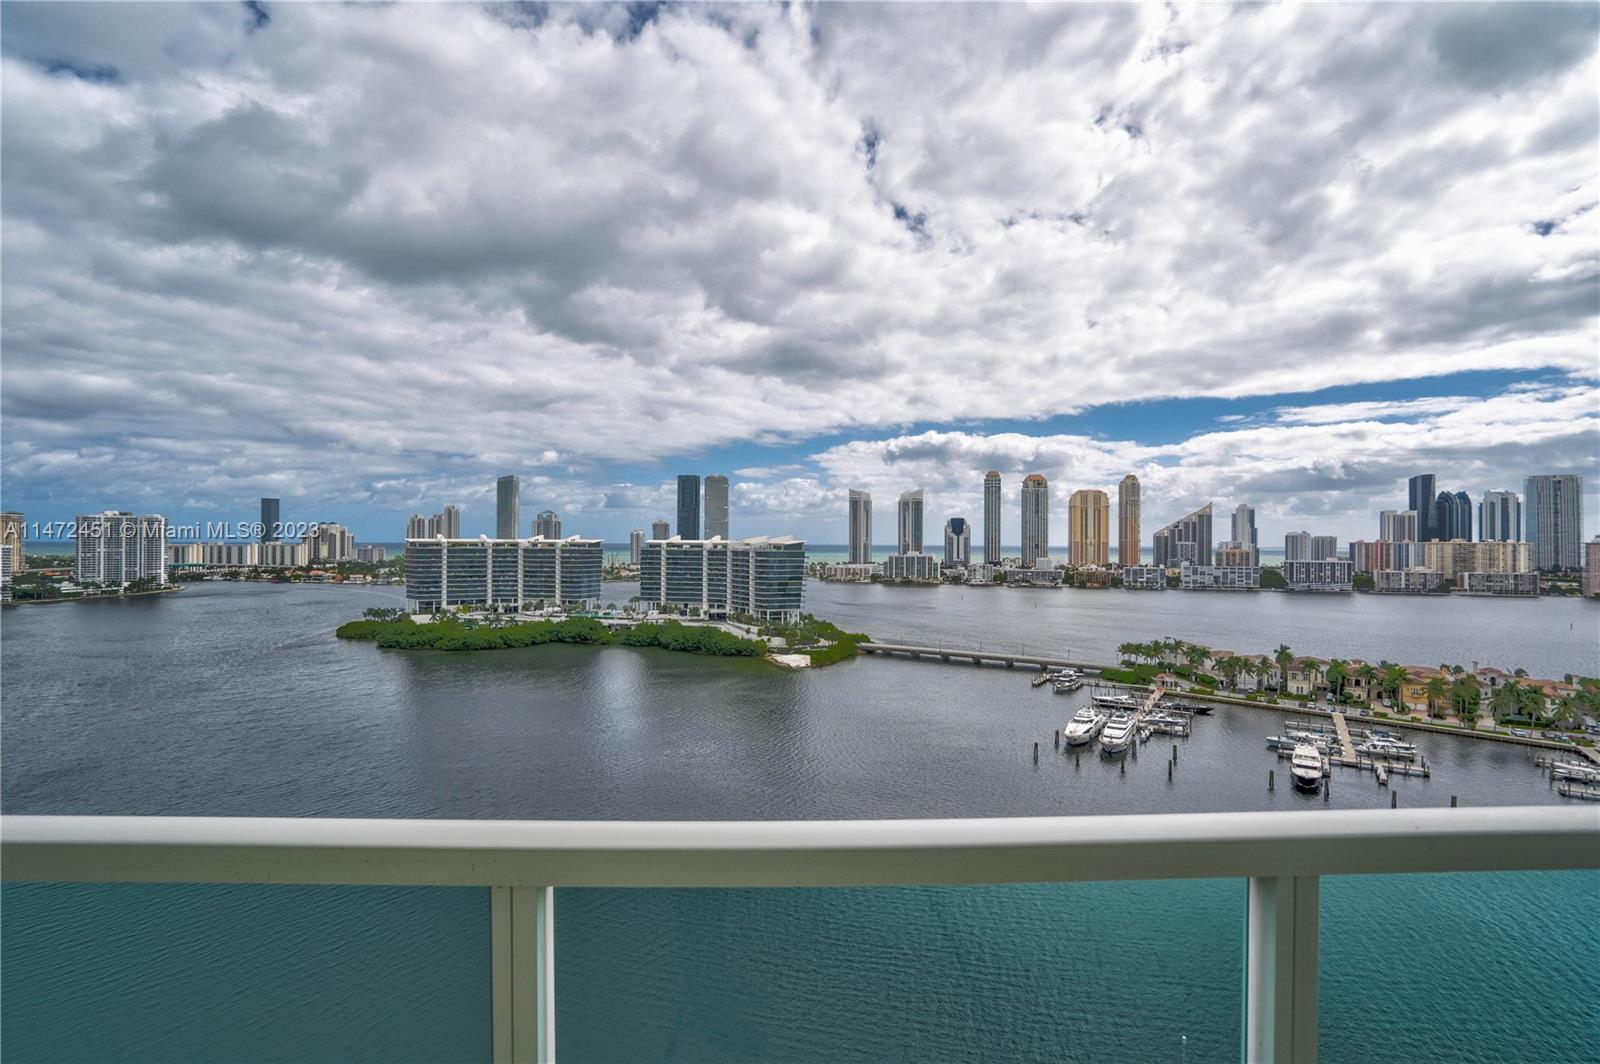 Discover unparalleled luxury living in the heart of Aventura with this chic high-floor residence boasting panoramic Intracoastal, ocean, and skyline views. This sophisticated property features 2 bedrooms plus a den, 3.5 bathrooms, 2 balconies, a private elevator, and 2,970 SF of living space. Enjoy high-end finishes such as impact windows, marble floors, and a gourmet kitchen. The primary suite offers balcony access, Western sunset views, a walk-in closet, and a spacious bathroom. Located in The Peninsula, a luxury full-service building, residents enjoy 24-hour security, concierge services, valet parking, fitness centers, a heated pool, spas, tennis courts, a children's playground, and more. Perfectly situated for easy access to Aventura's amenities, schools, beaches, and dining options.